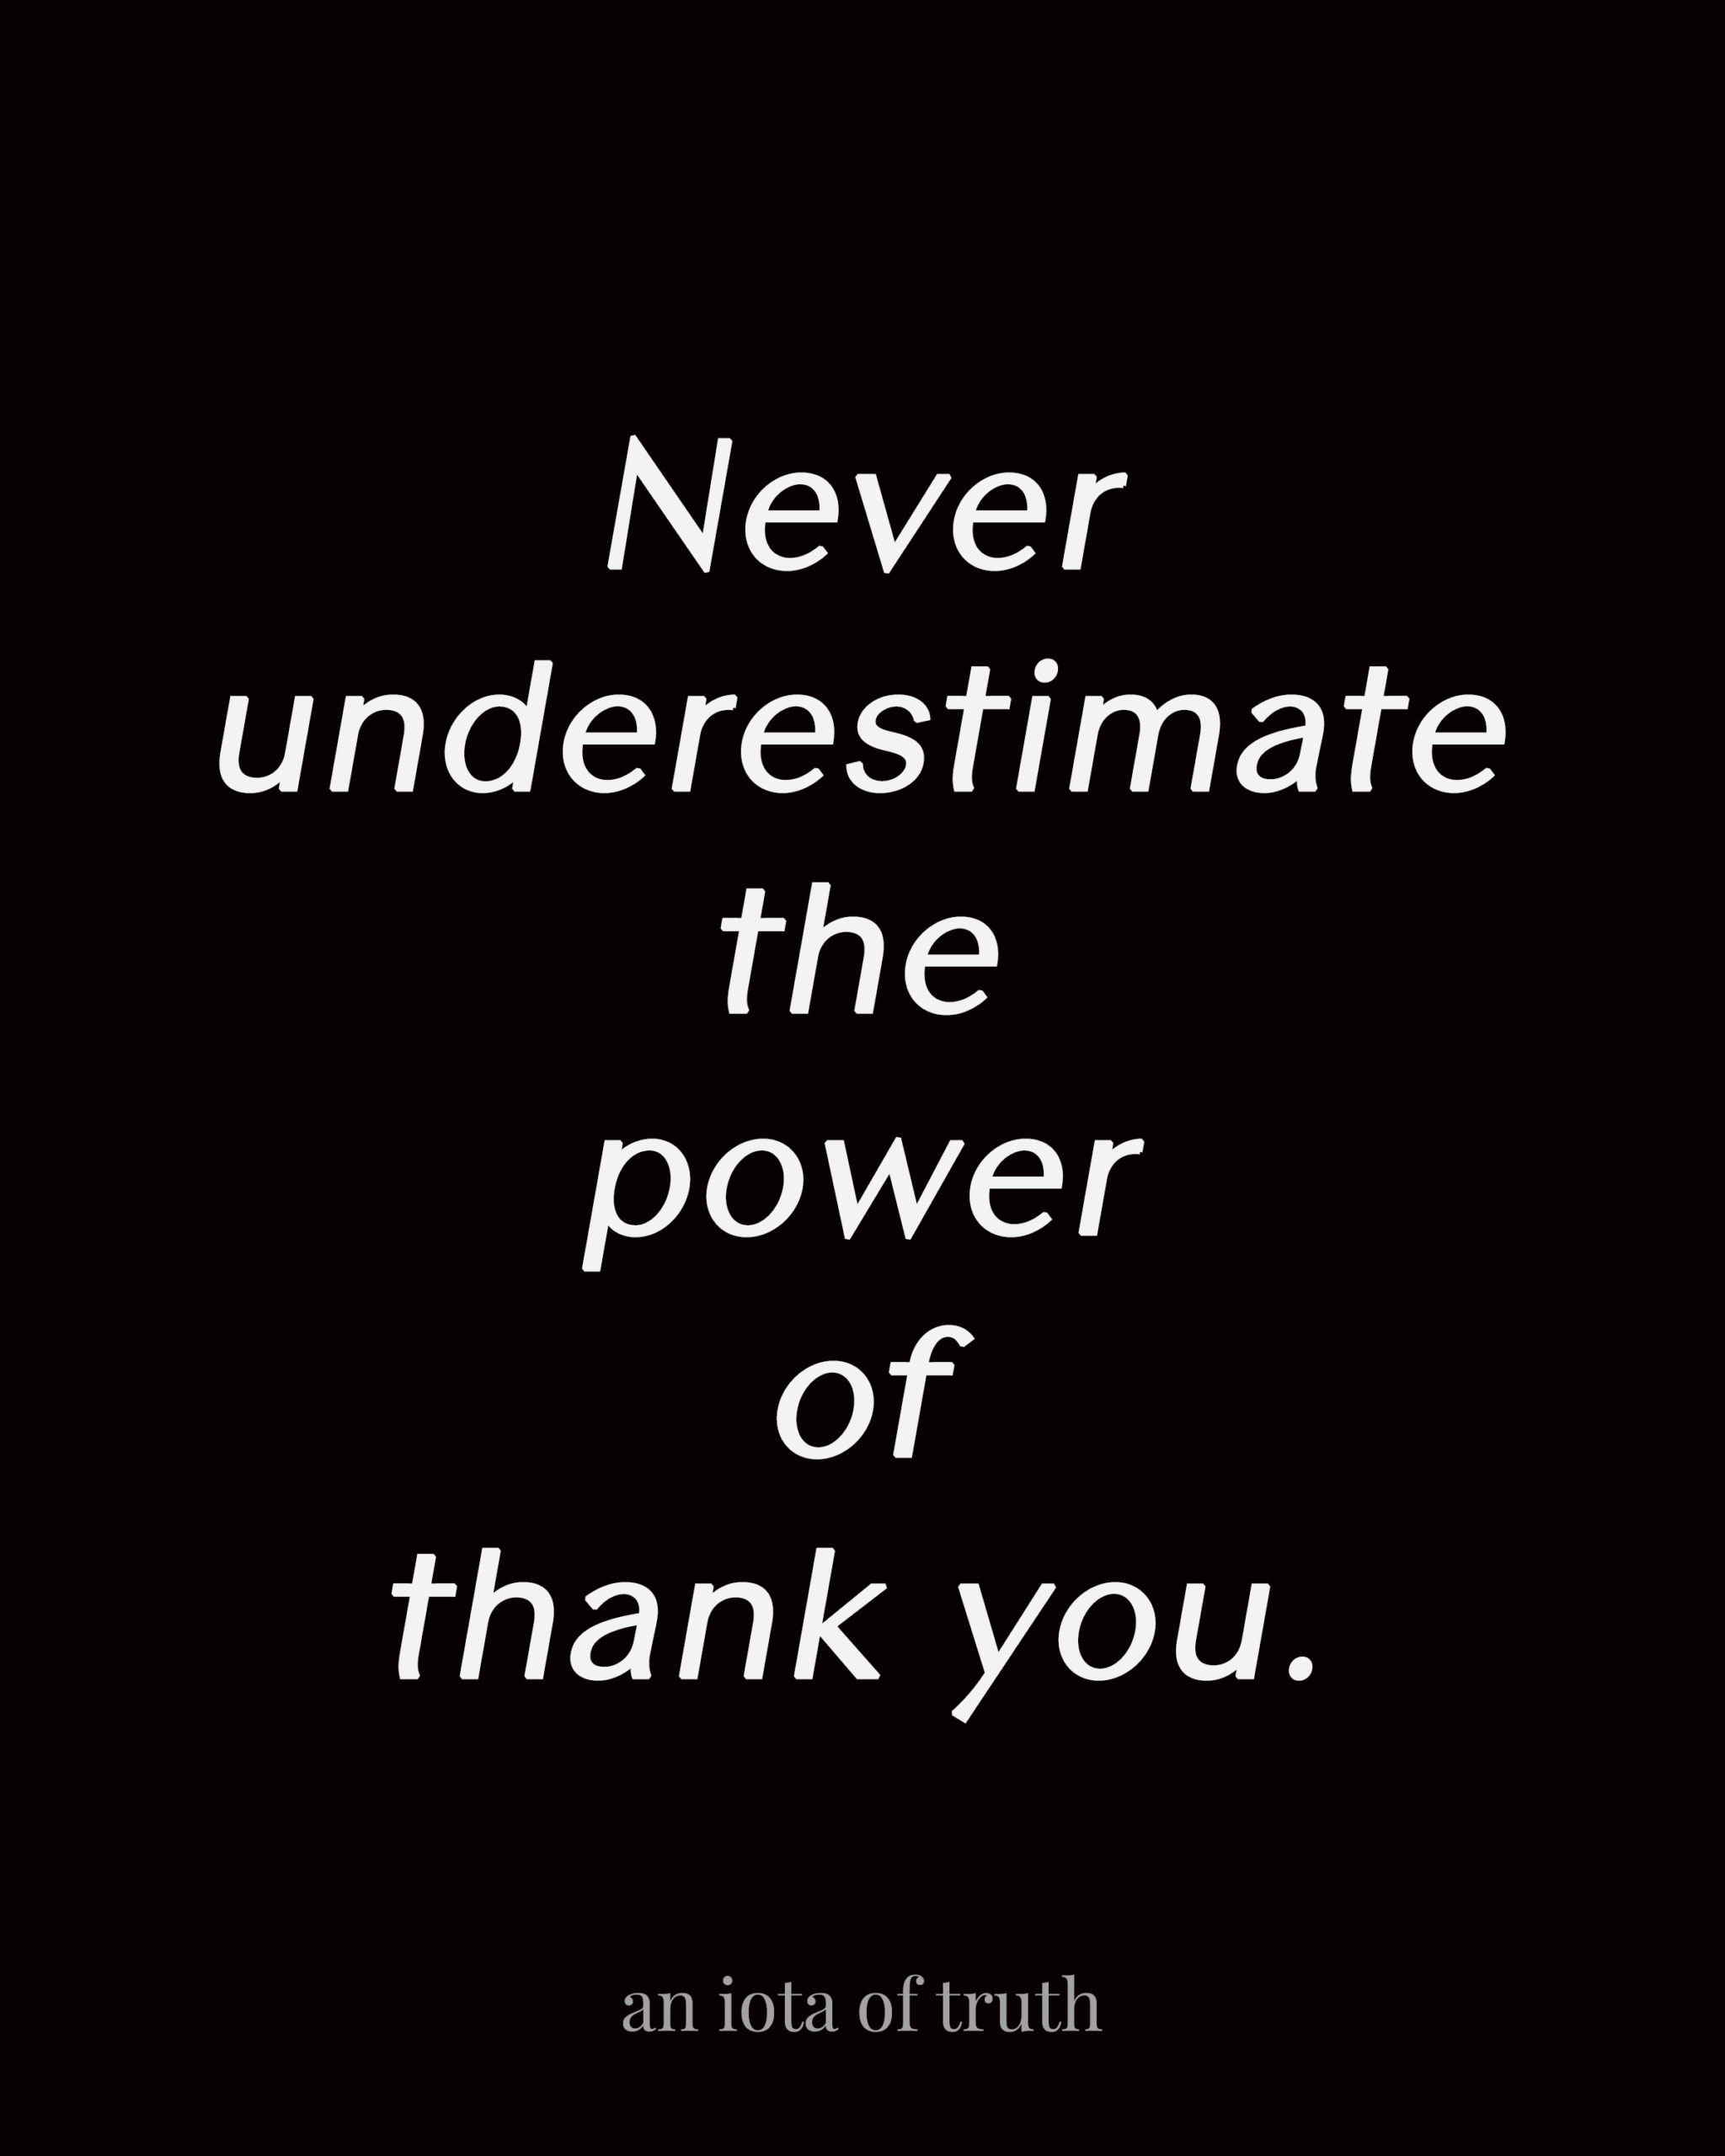 Never underestimate the power of thank you.